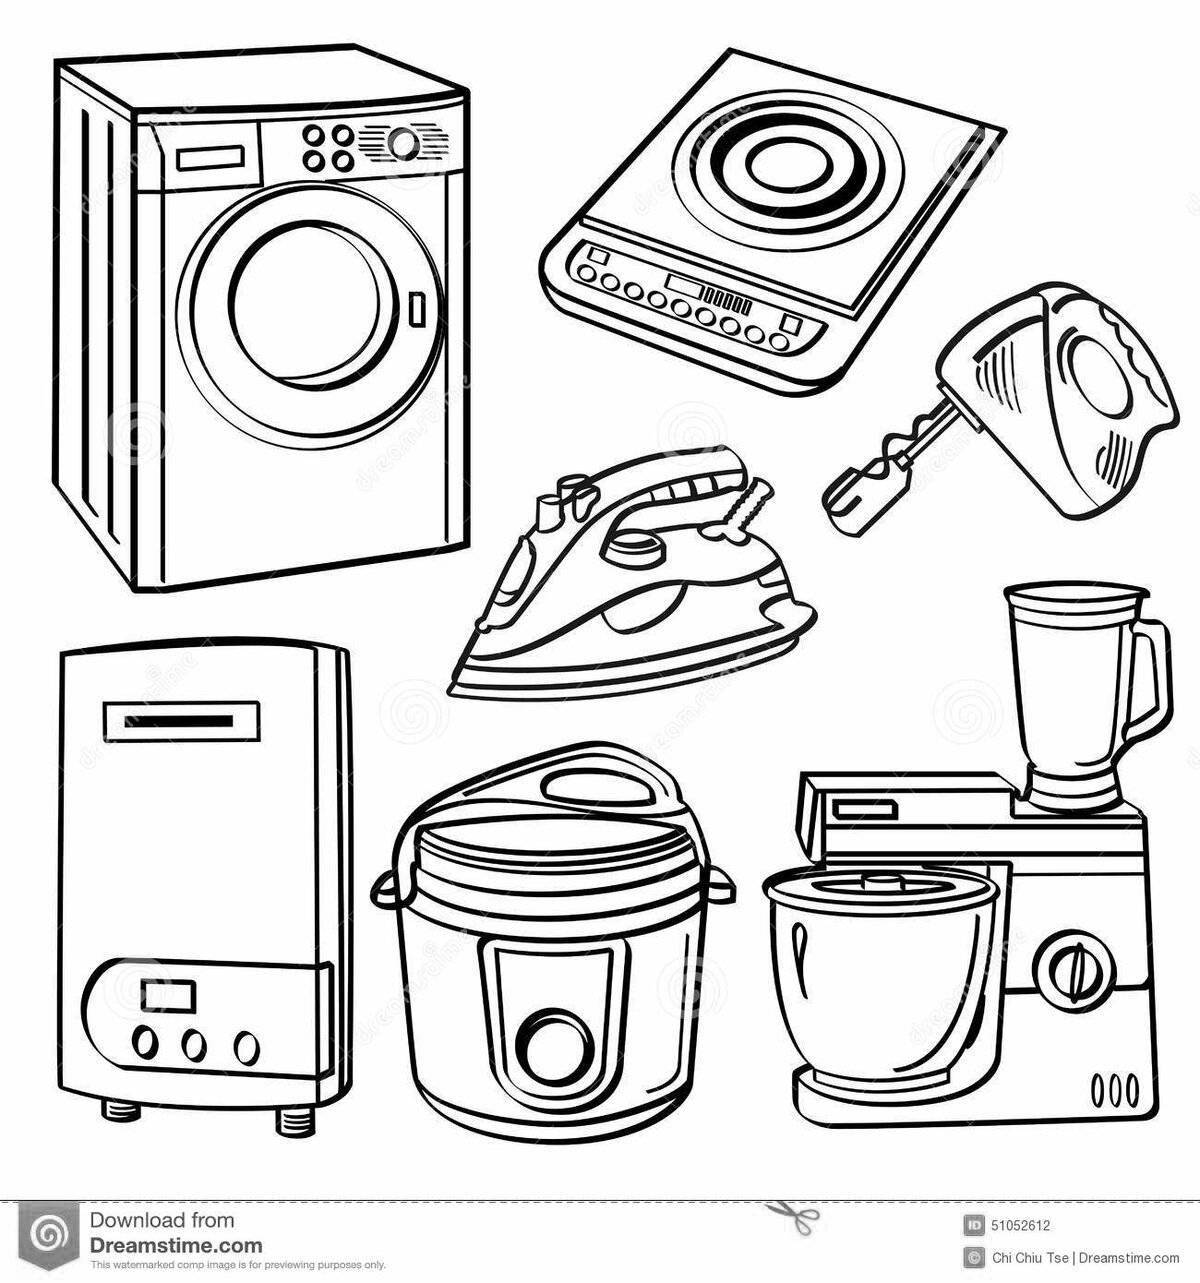 Charming home appliances coloring book